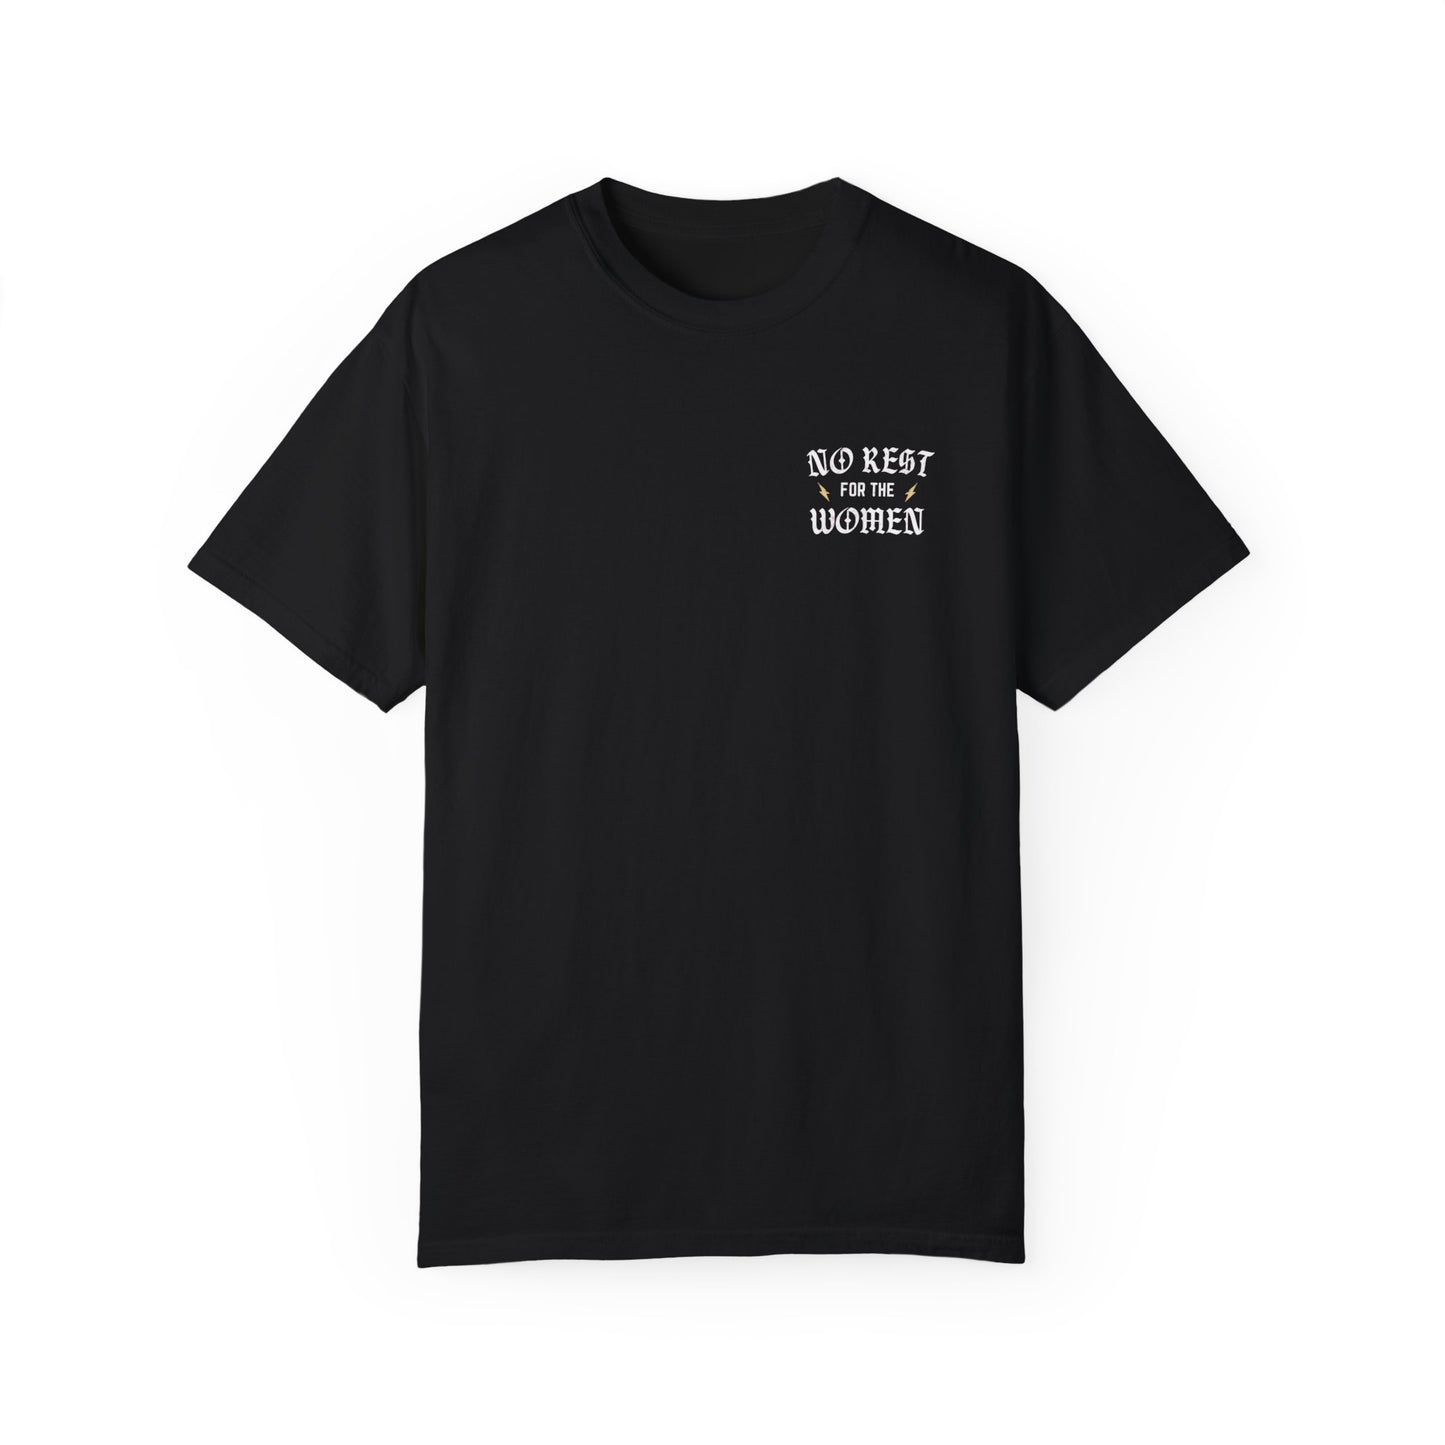 No Rest For The Women Tee